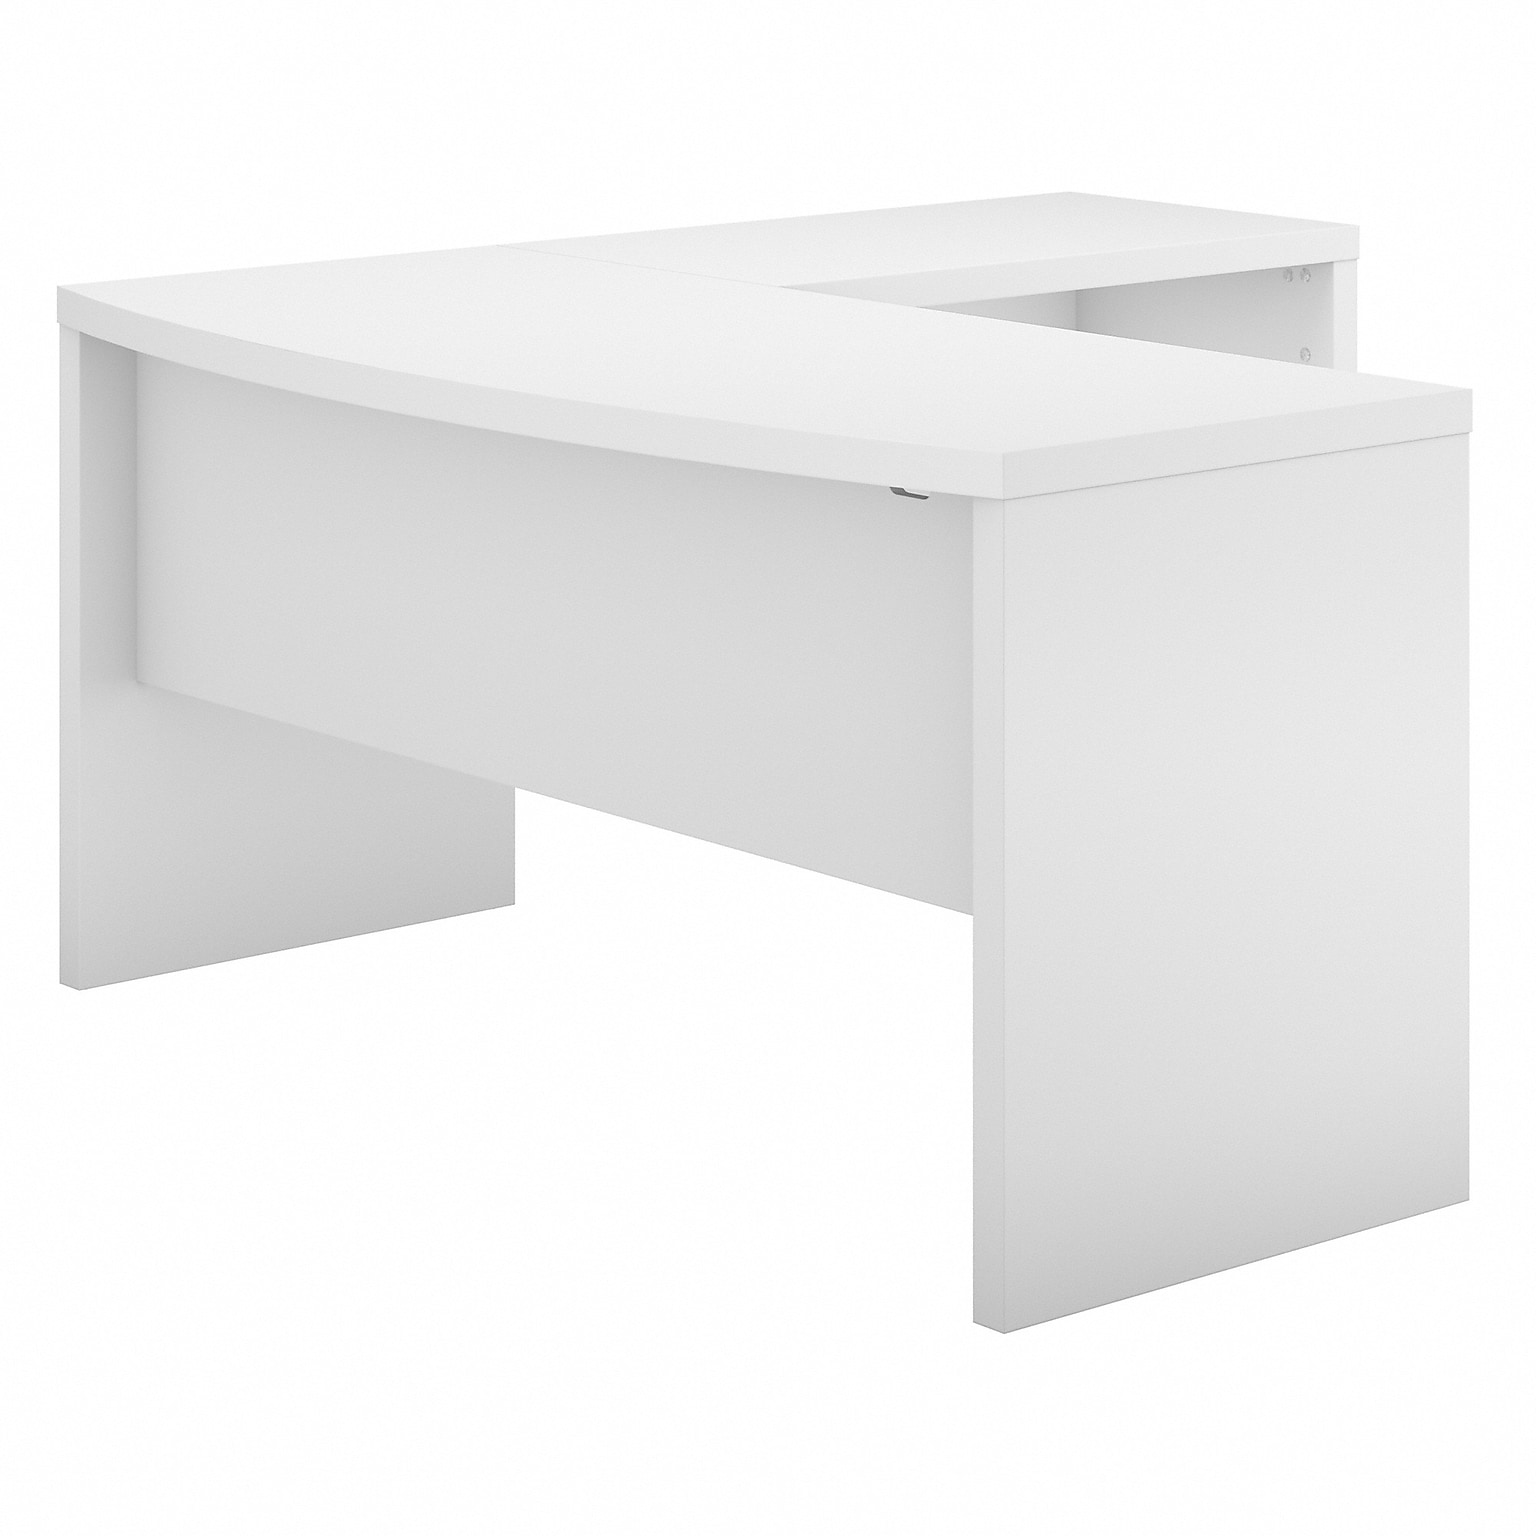 Office by kathy ireland® Echo L Shaped Bow Front Desk, Pure White/Pure White (ECH025PW)